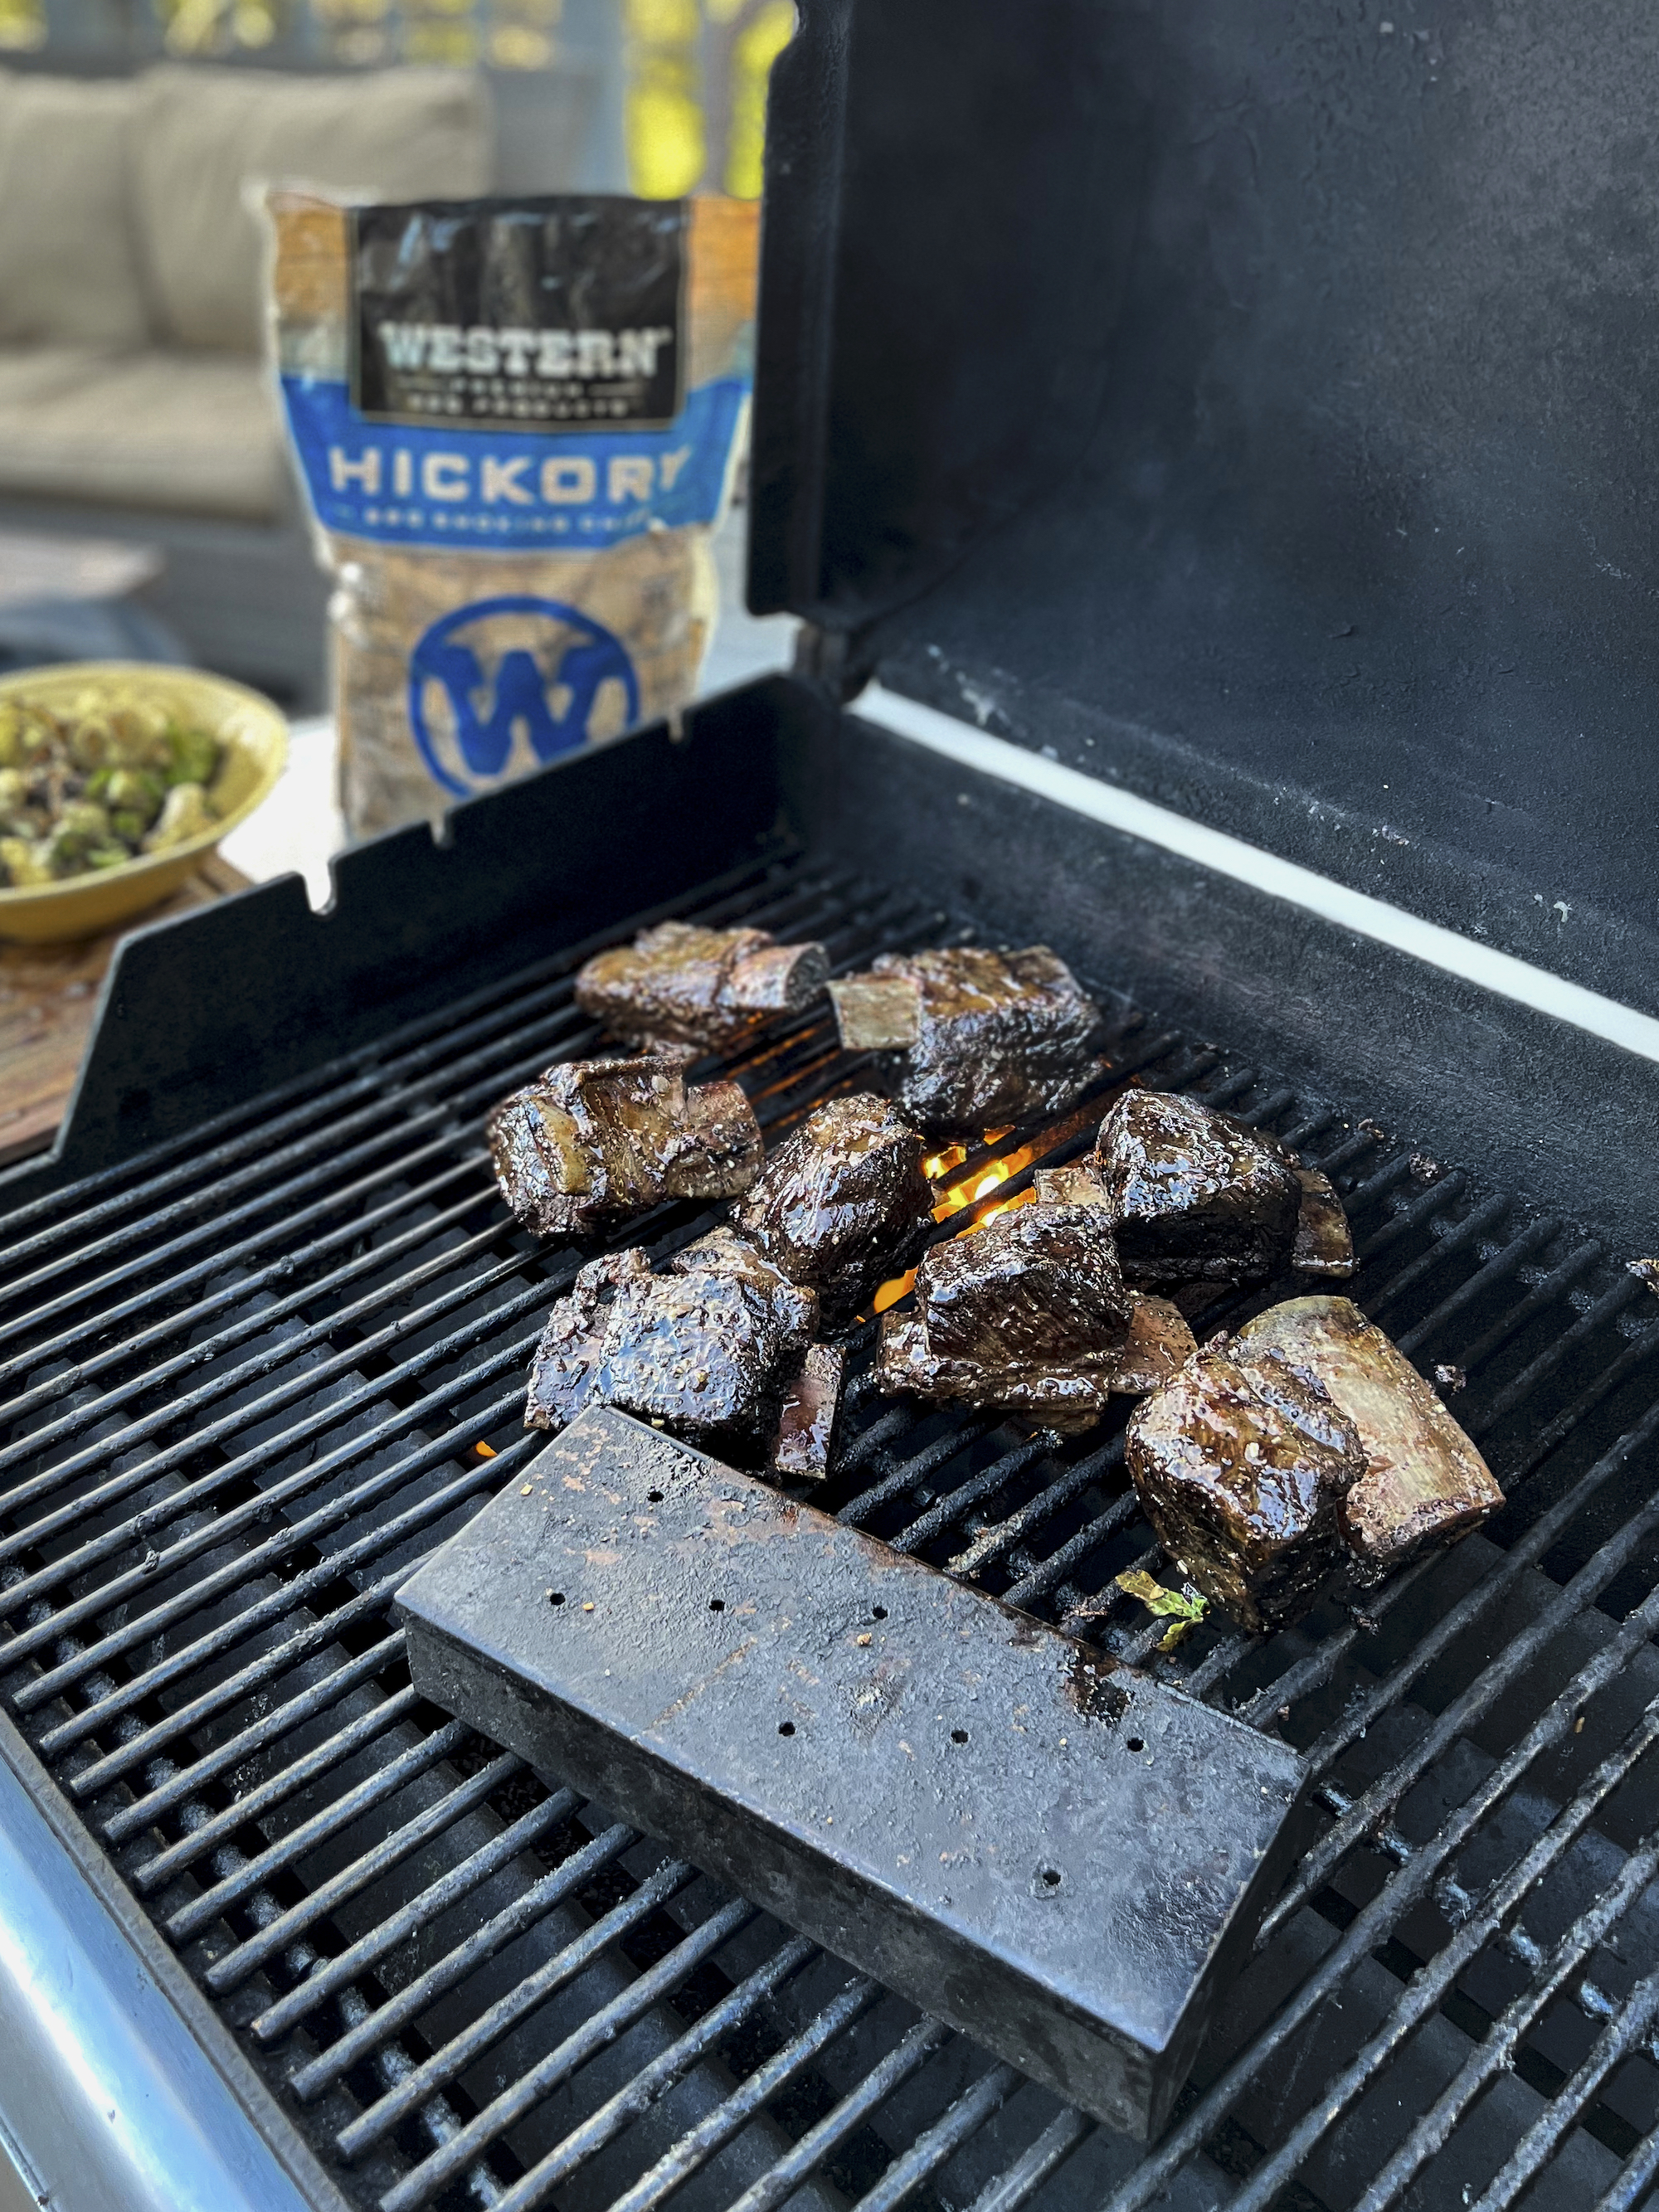 A smoker box on the grill with partially cooked meat on bones. A bag of hickory smoking chips is in the background. 